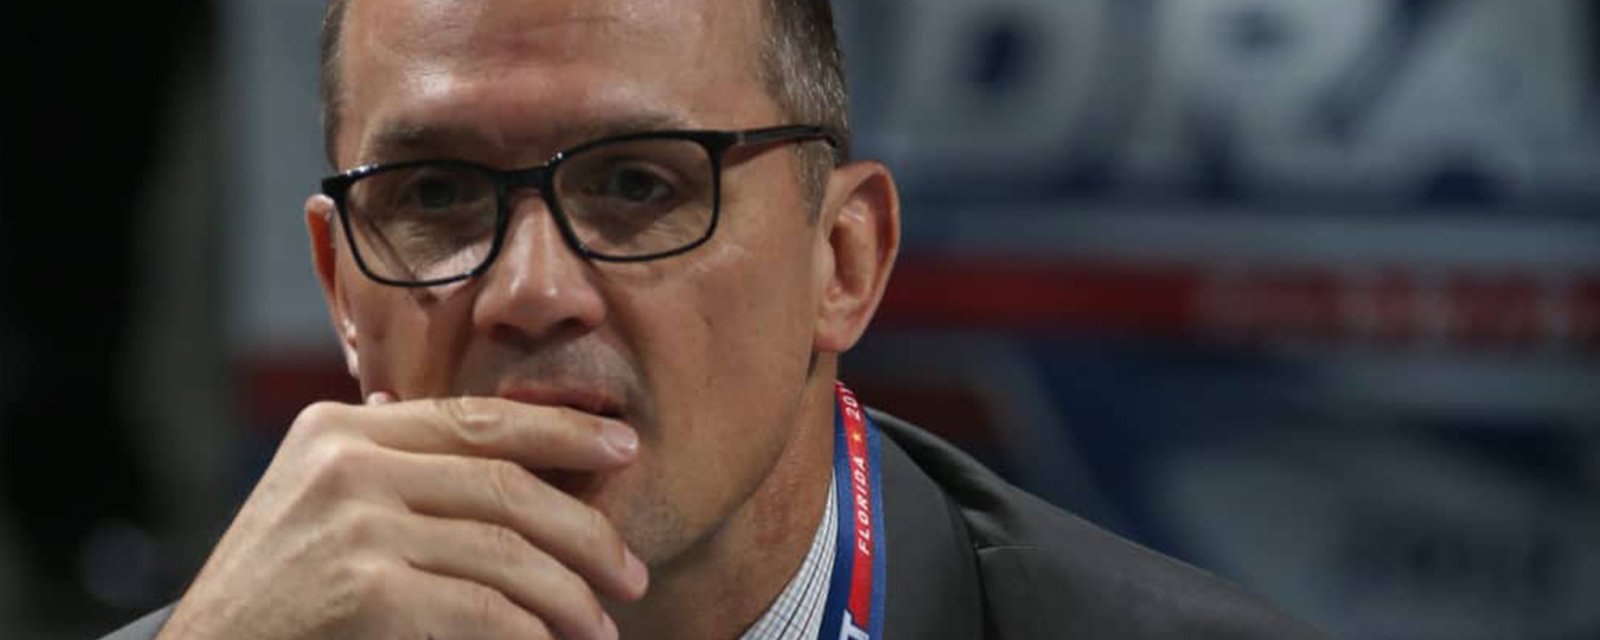 Yzerman opens up about strategy and 2019 Draft for the first time since re-joining Red Wings